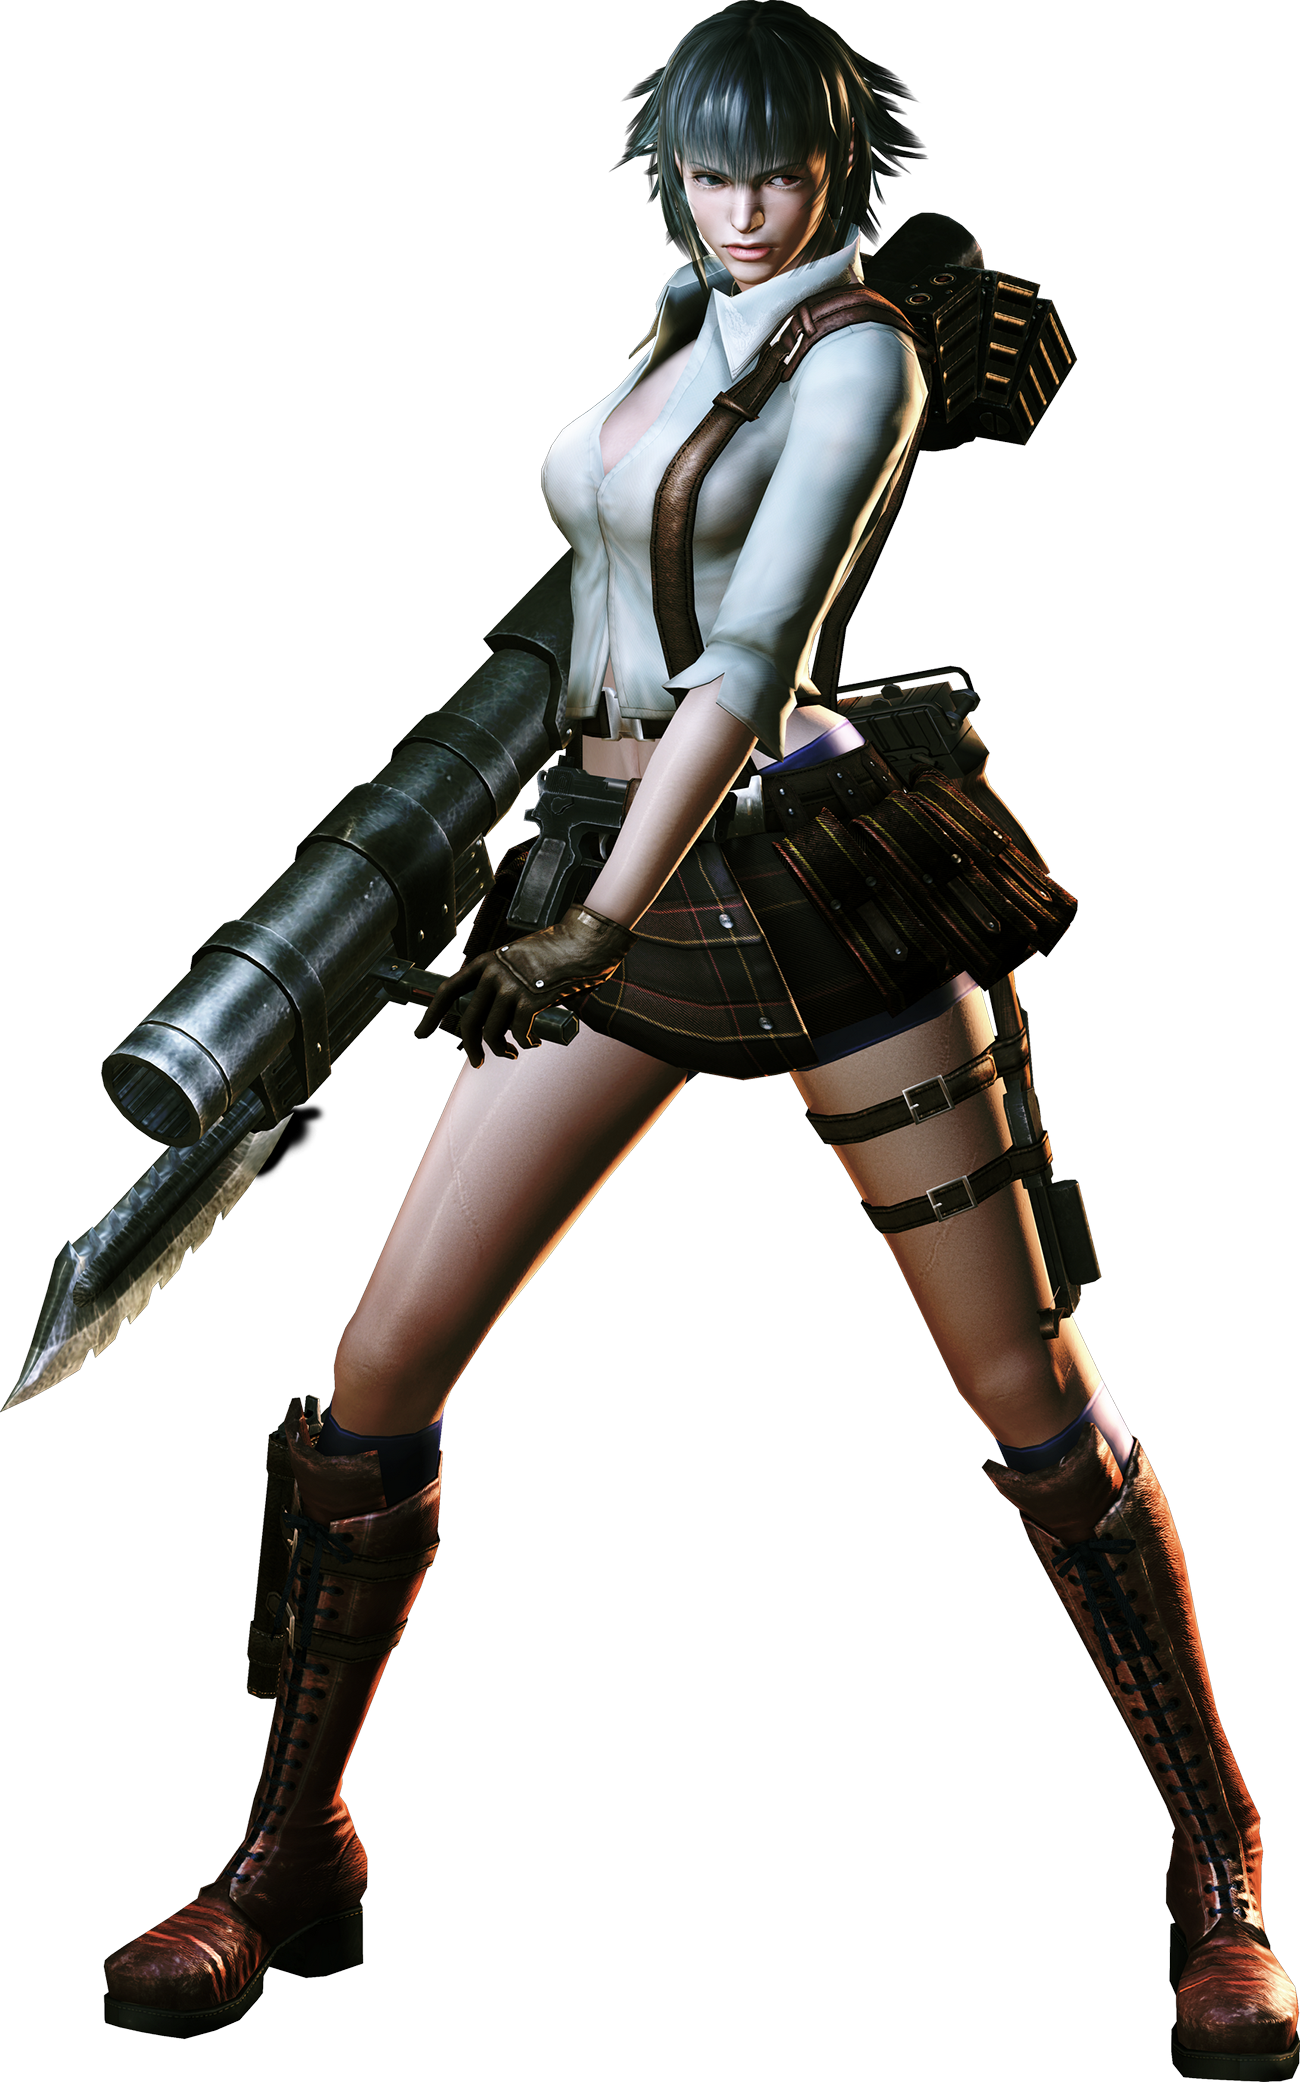 1431448192-dmc4-special-edition-lady-pre-order-costume.png